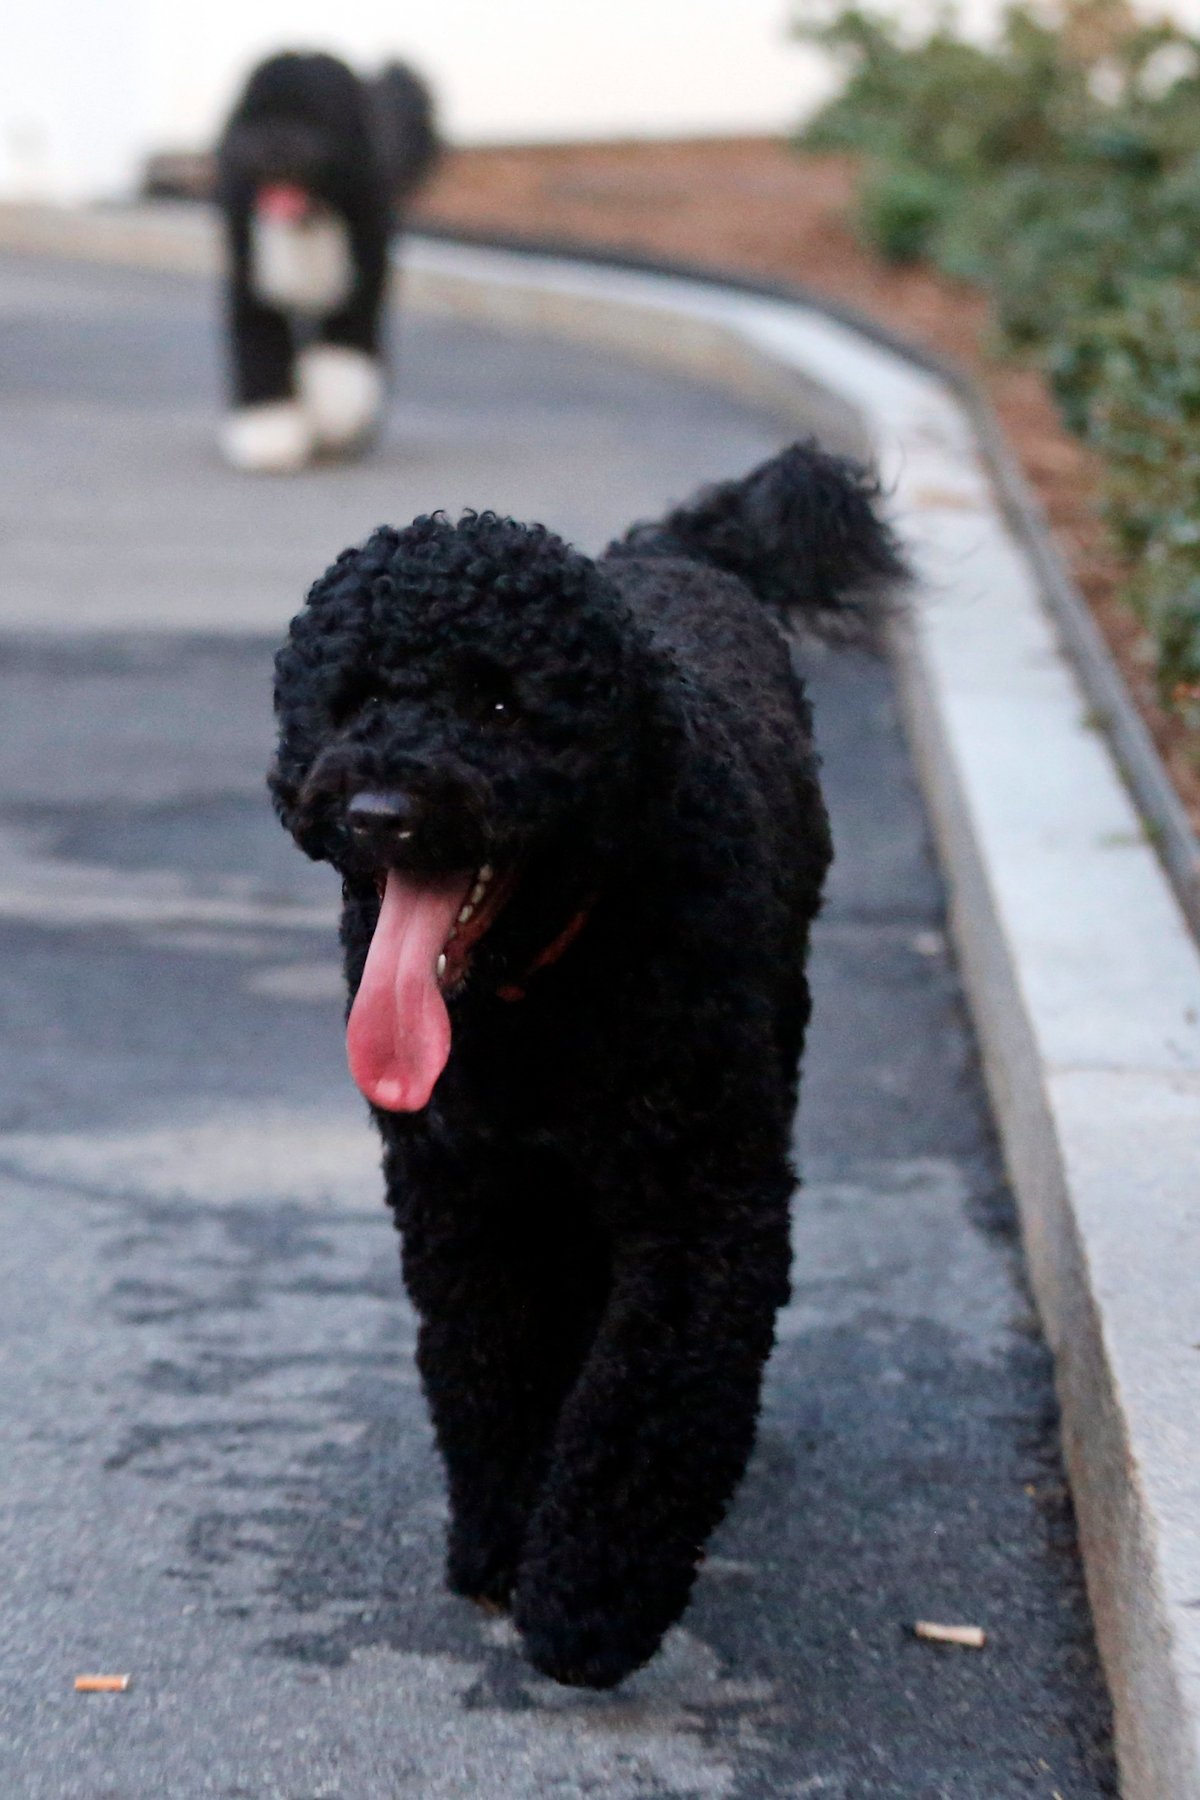 File-This Sept. 10, 2013, file photo shows Sunny, foreground, and Bo, Portuguese water dogs belonging to President Barack Obama and his family, walking with White House employee along the West Wing of the White House in Washington. A North Dakota man who allegedly traveled to the nations capital to kidnap a dog belonging to President Barack Obama has been arrested. D.C. Superior Court documents say Secret Service agents interviewed Scott D. Stockert of Dickinson, North Dakota, after hearing from Secret Service agents in Minnesota that he was on his way to Washington to kidnap a pet owned by the first family.